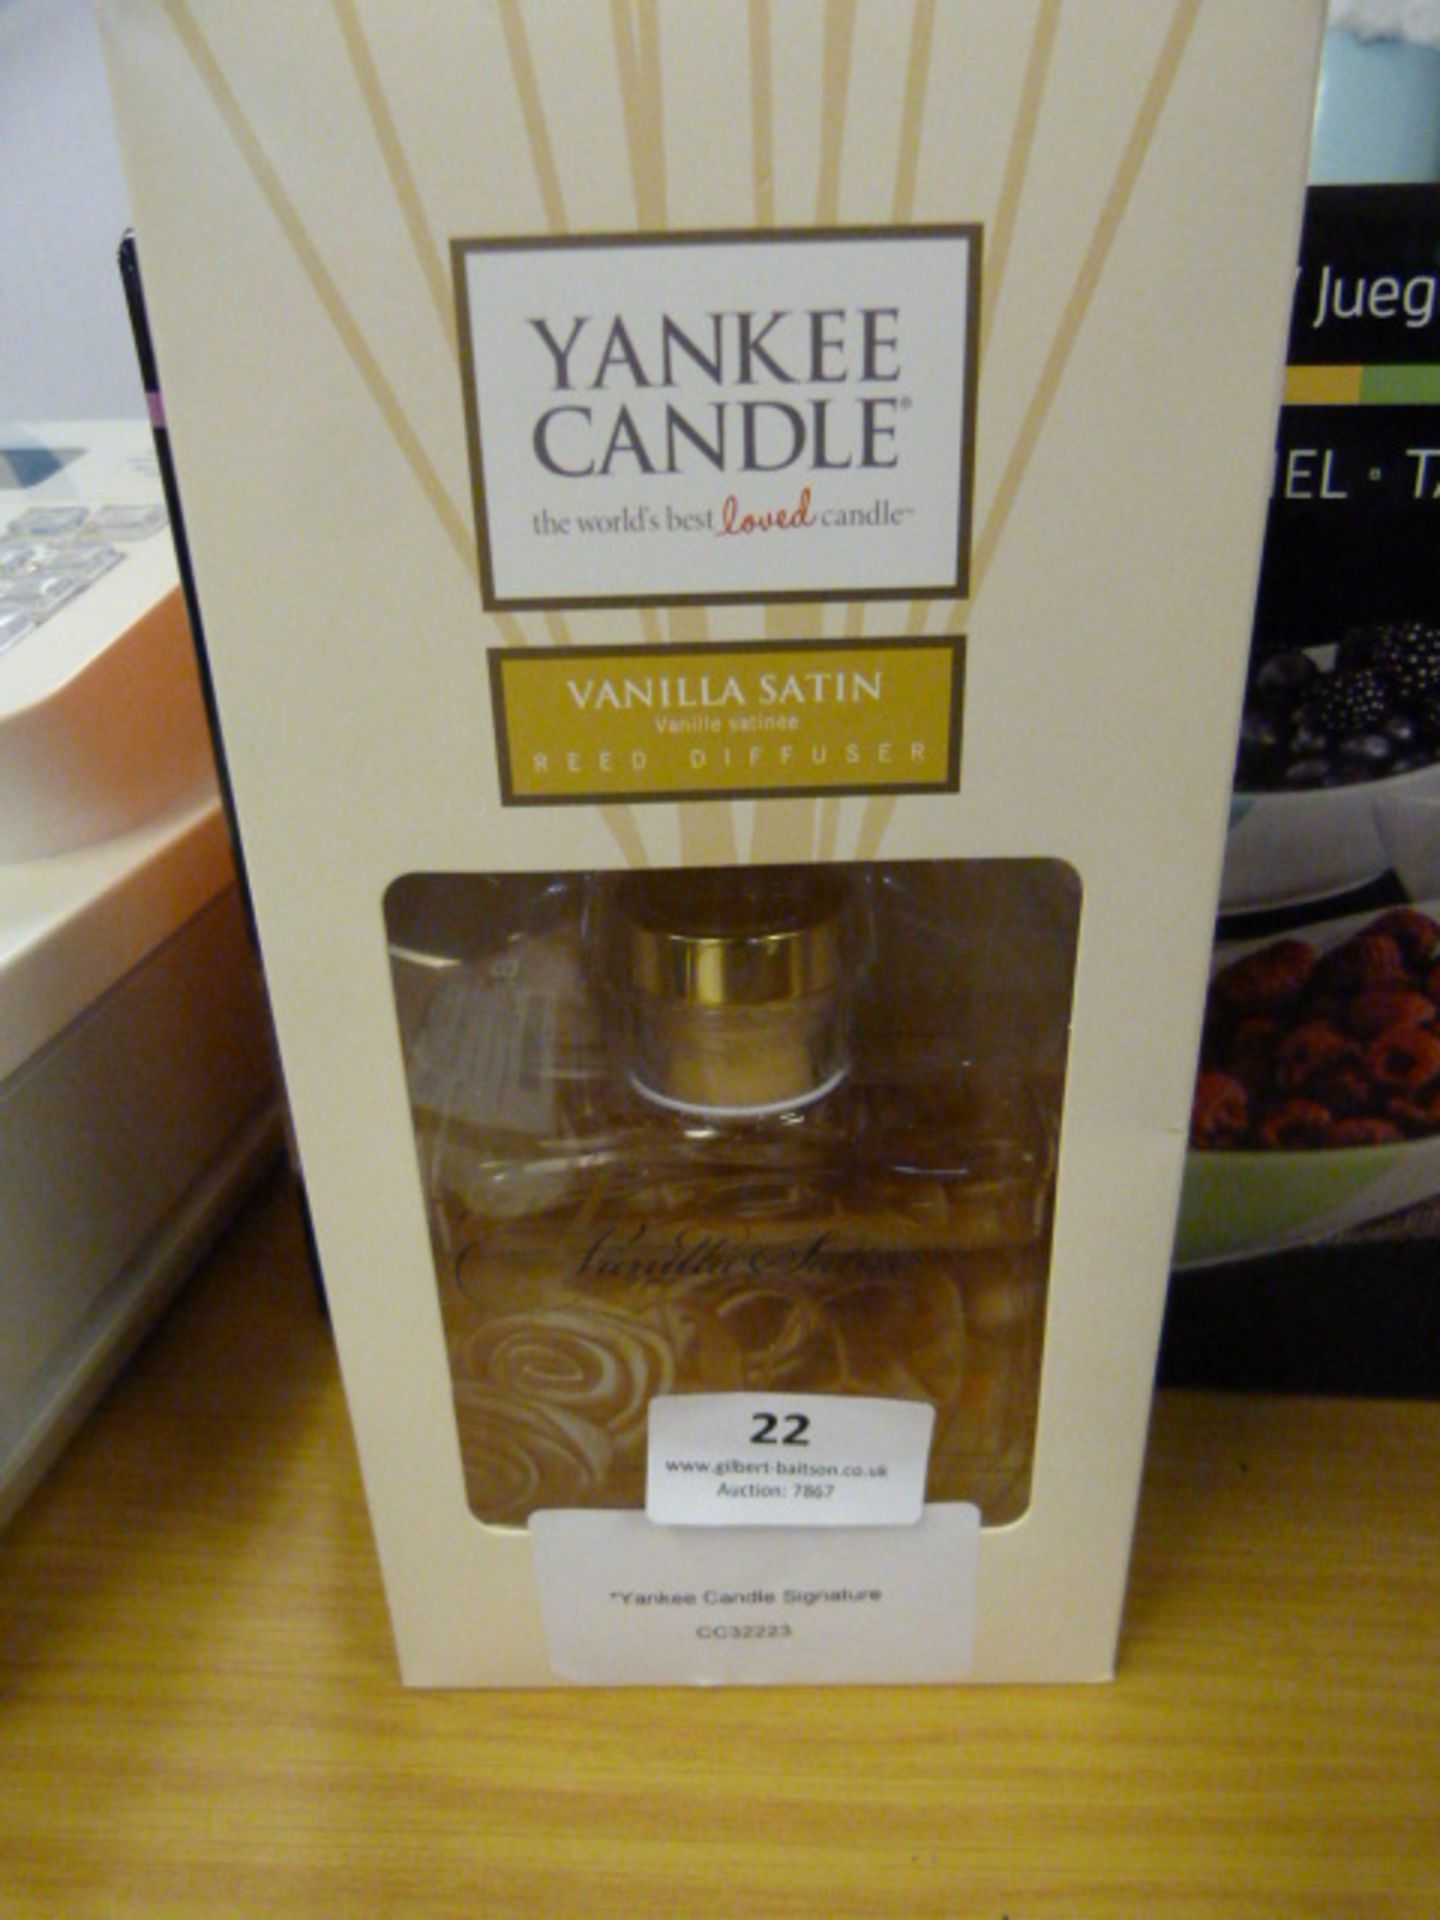 *Yankee Candle Signature Diffuser